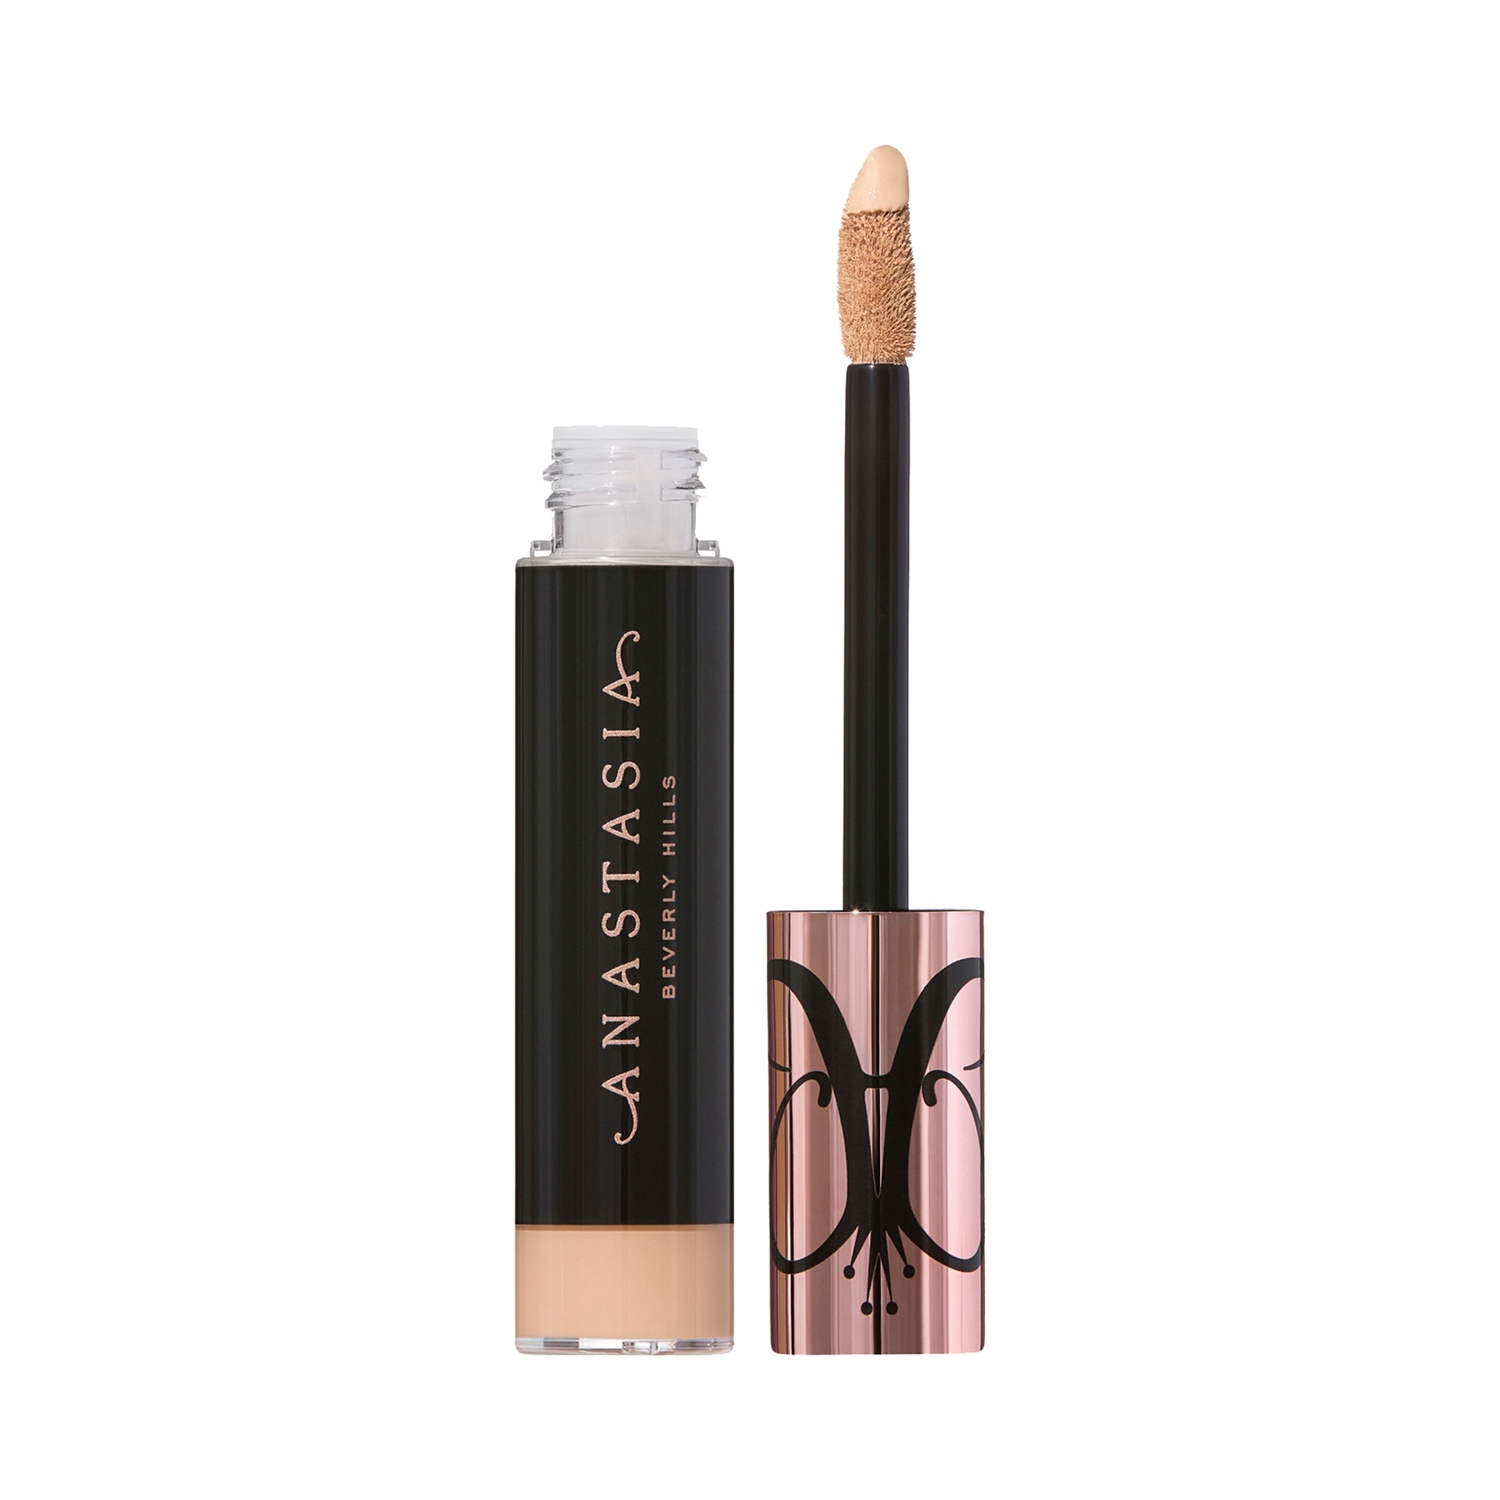 Anastasia Beverly Hills | Anastasia Beverly Hills Magic Touch Concealer - Shade 12 (12ml)